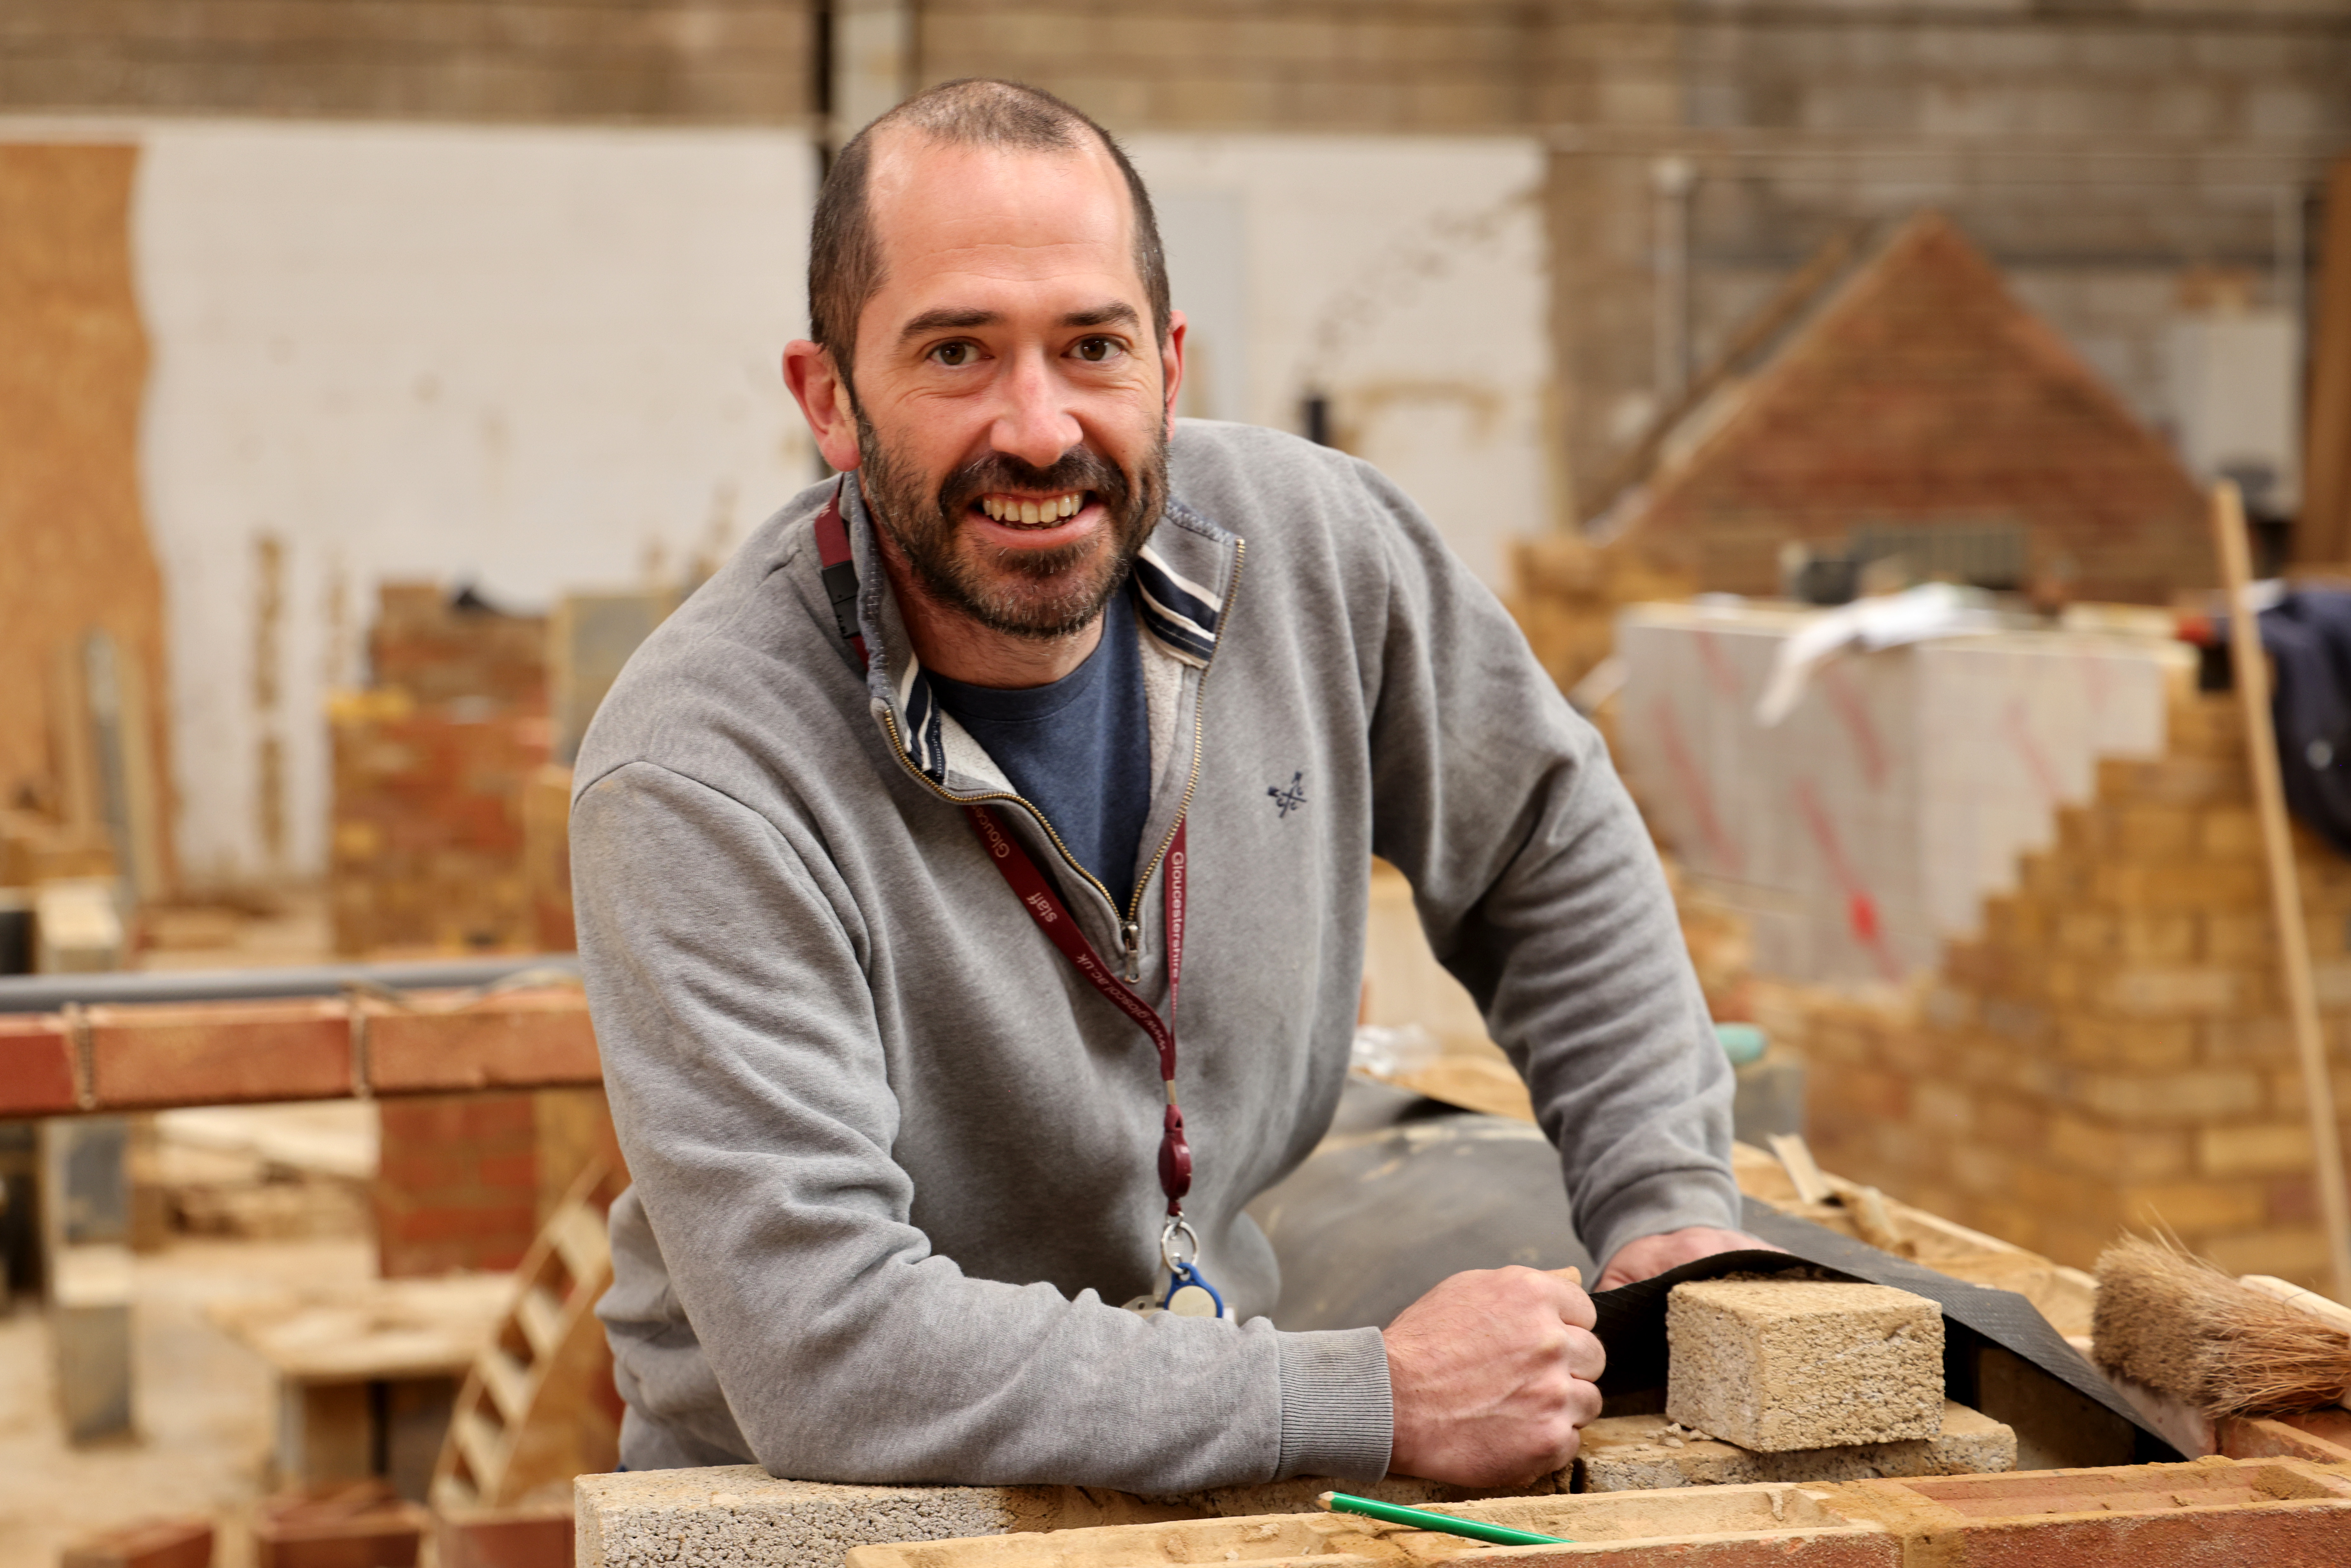 Meet Glen Taylor, Lecturer in Construction at GC